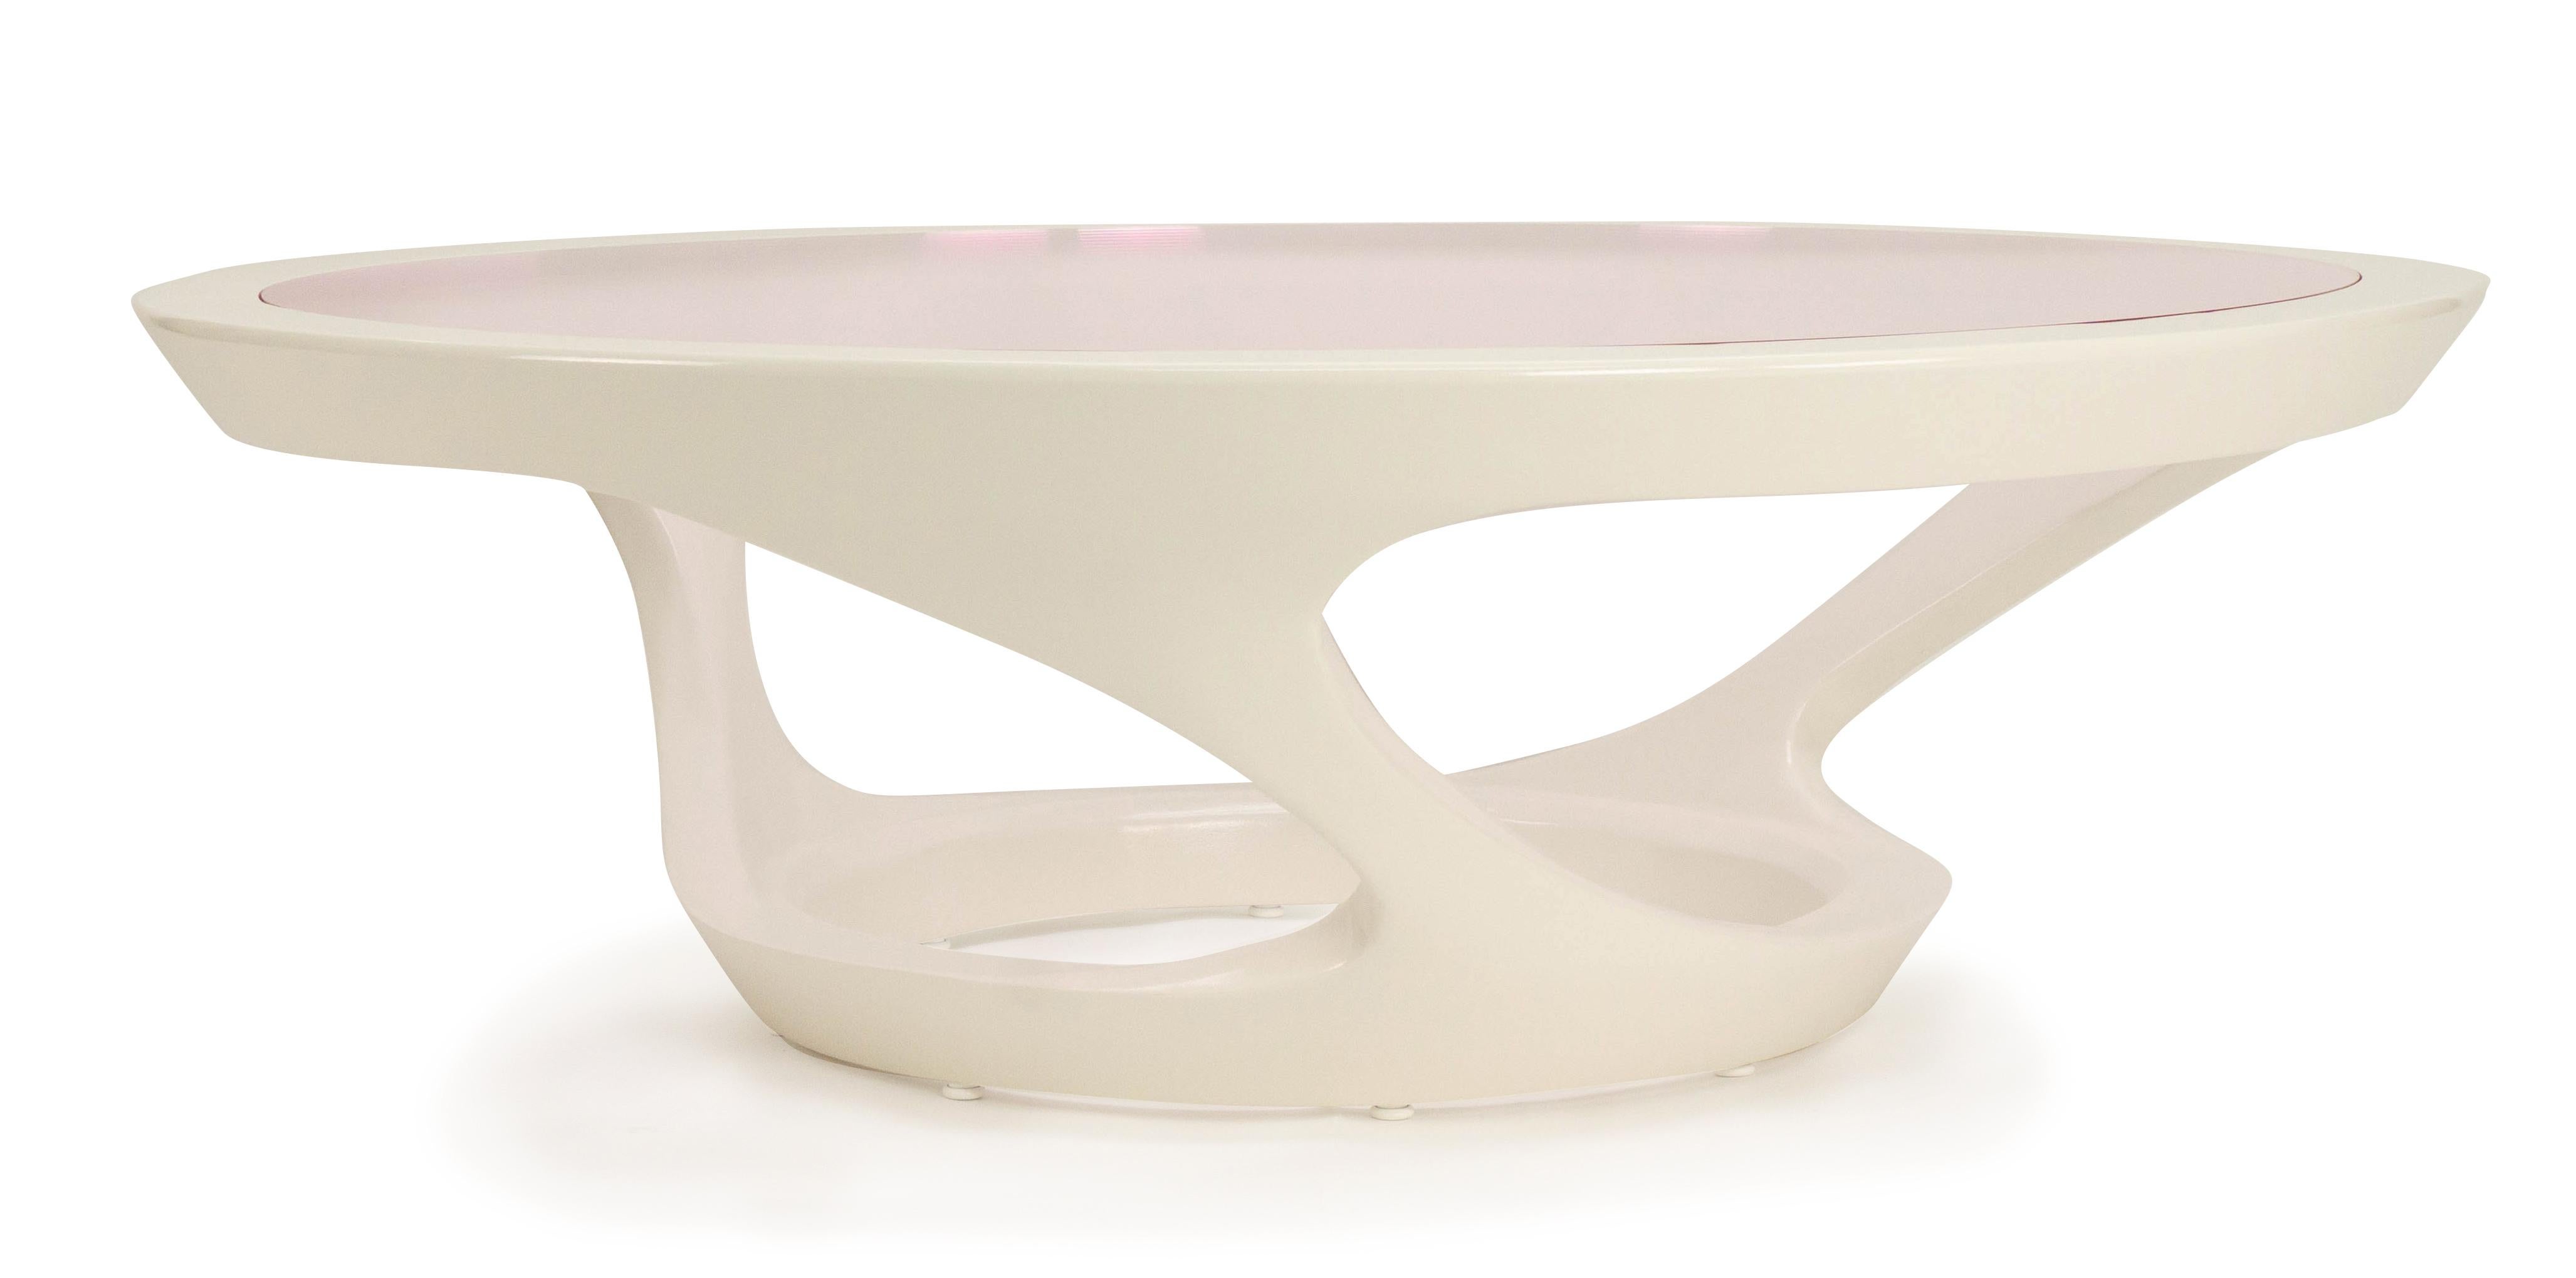 American Modern Round Lucite Lacquered Coffee Table For Sale